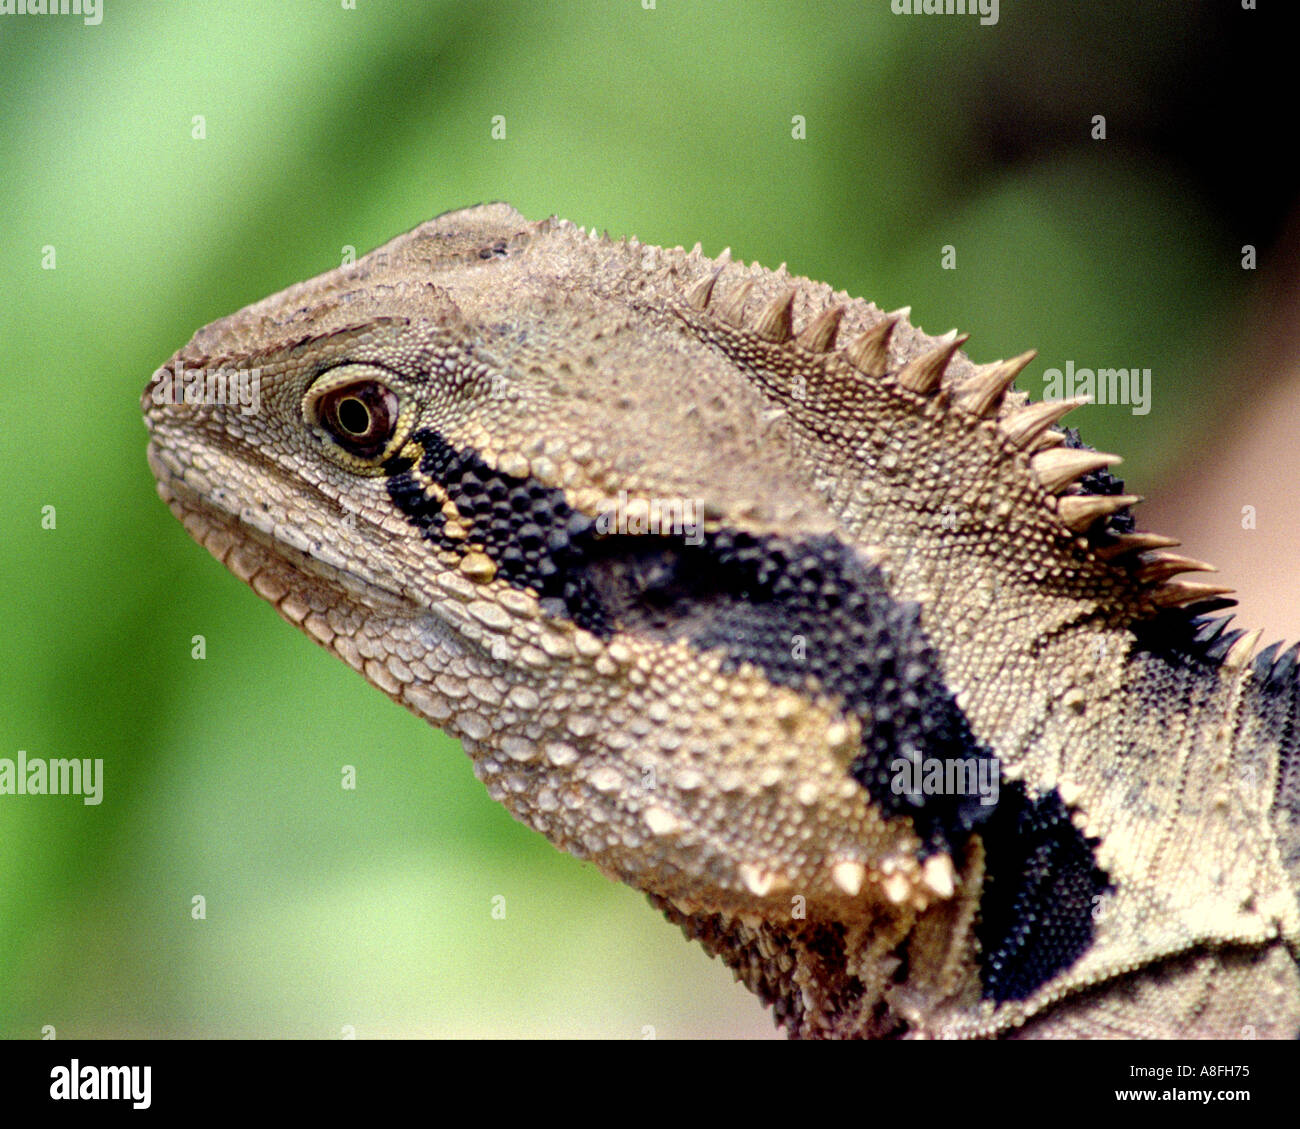 A CLOSE UP OF A WATER DRAGONS HEAD BAPN 433 Stock Photo